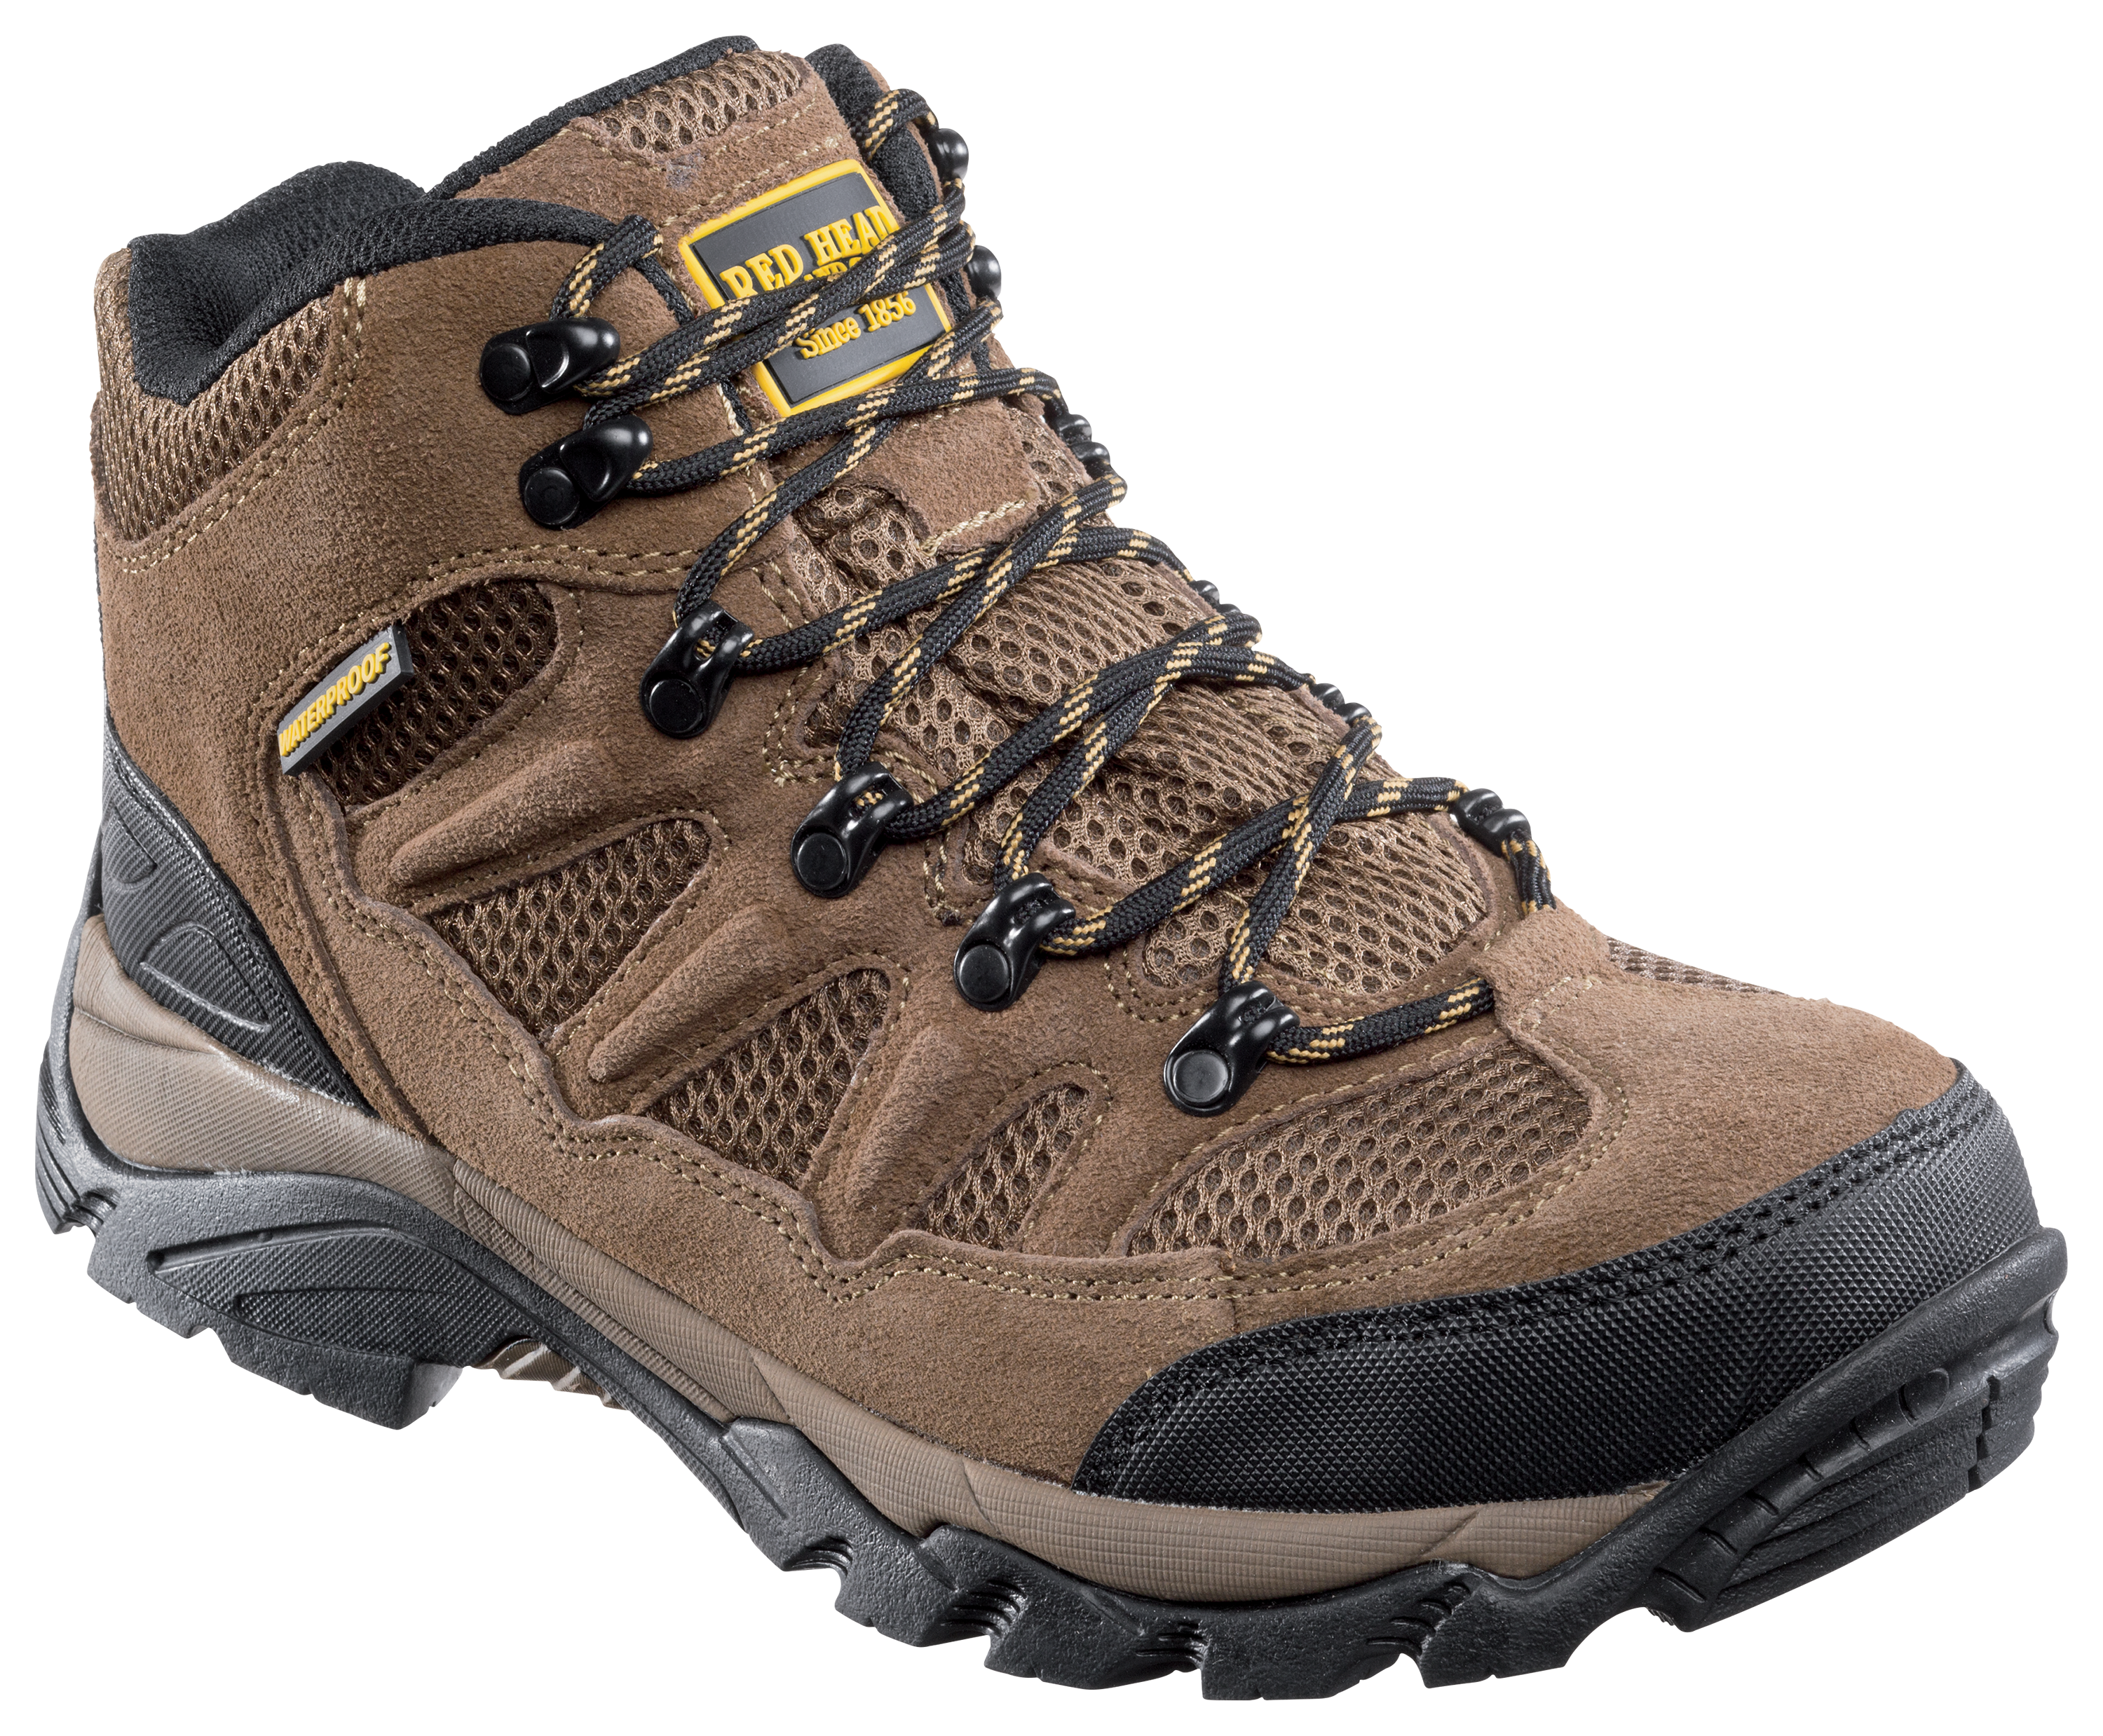 RedHead Steel Toe Boots for Men